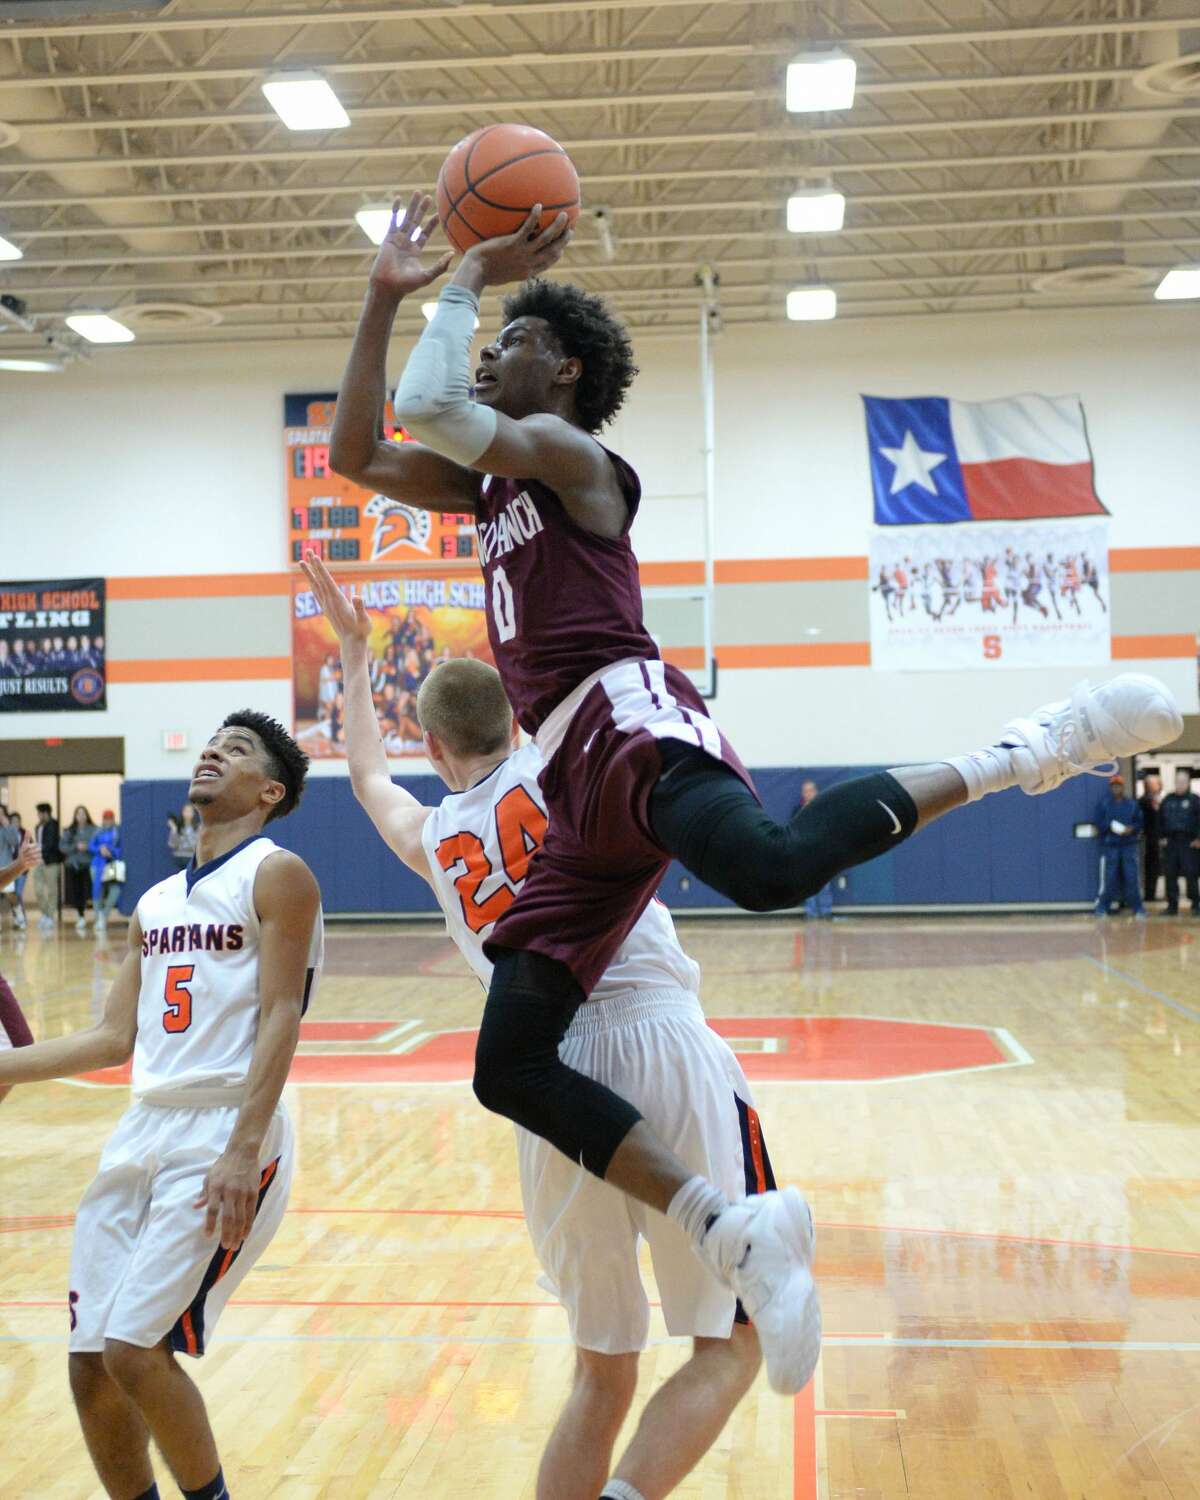 Jay Jay Chandler (0) of Cinco Ranch shoots past Jonathan Howell (24) and Logan West (5) of Seven Lakes during the first half of a boys basketball game between the Cinco Ranch Cougars and the Seven Lakes Spartans on Friday January 6, 2017 at the Seven Lakes HS, Katy, TX.